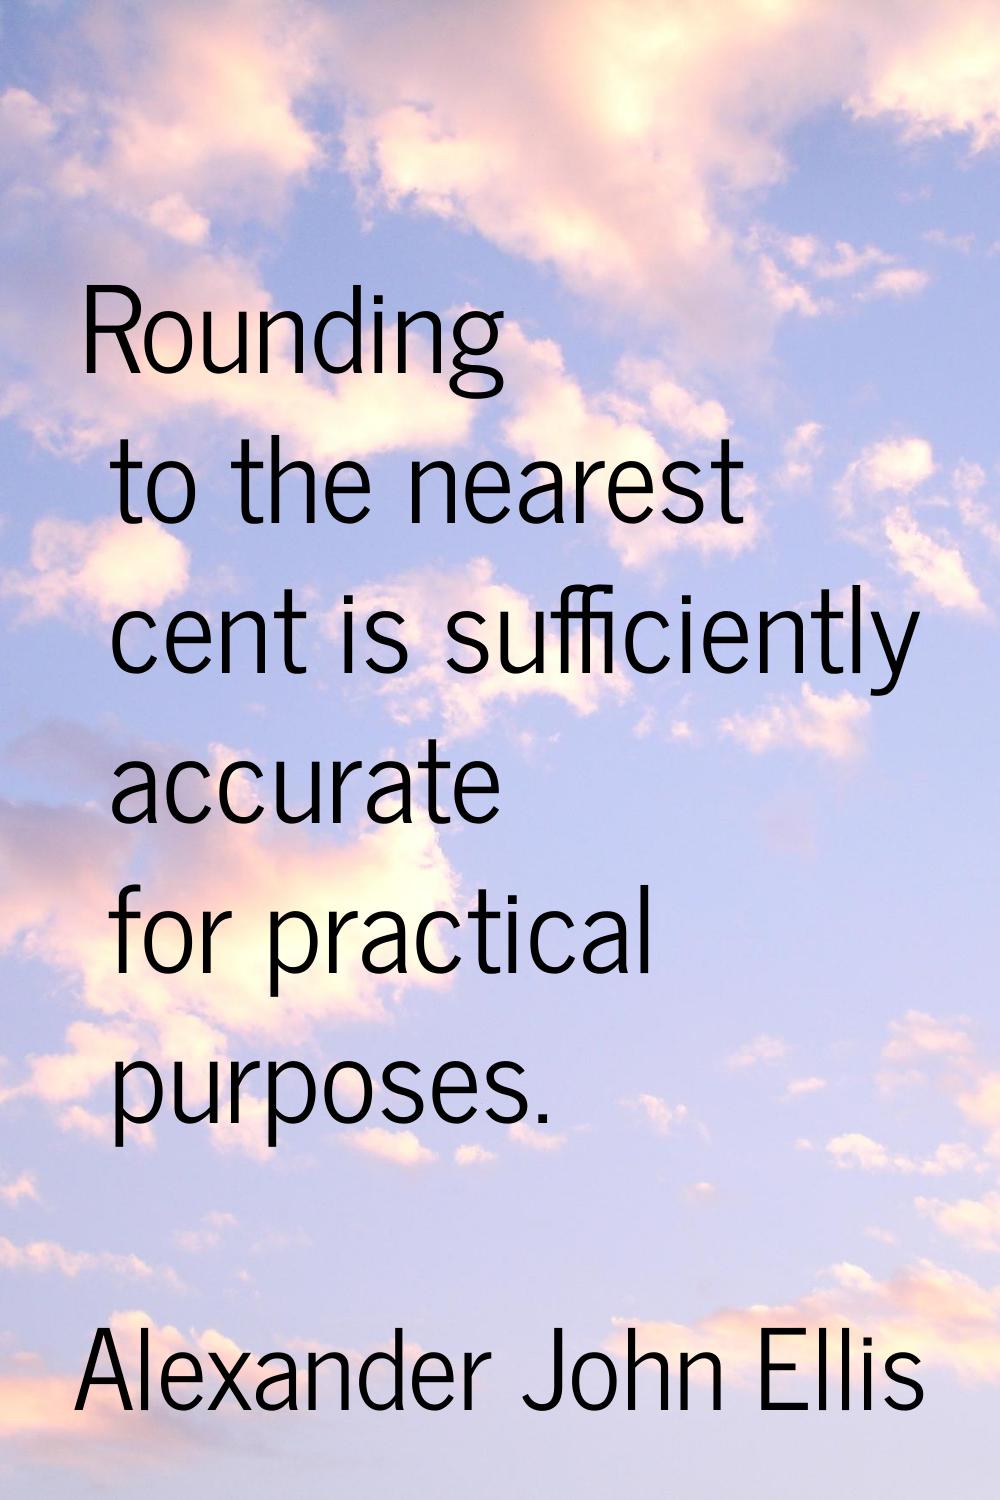 Rounding to the nearest cent is sufficiently accurate for practical purposes.